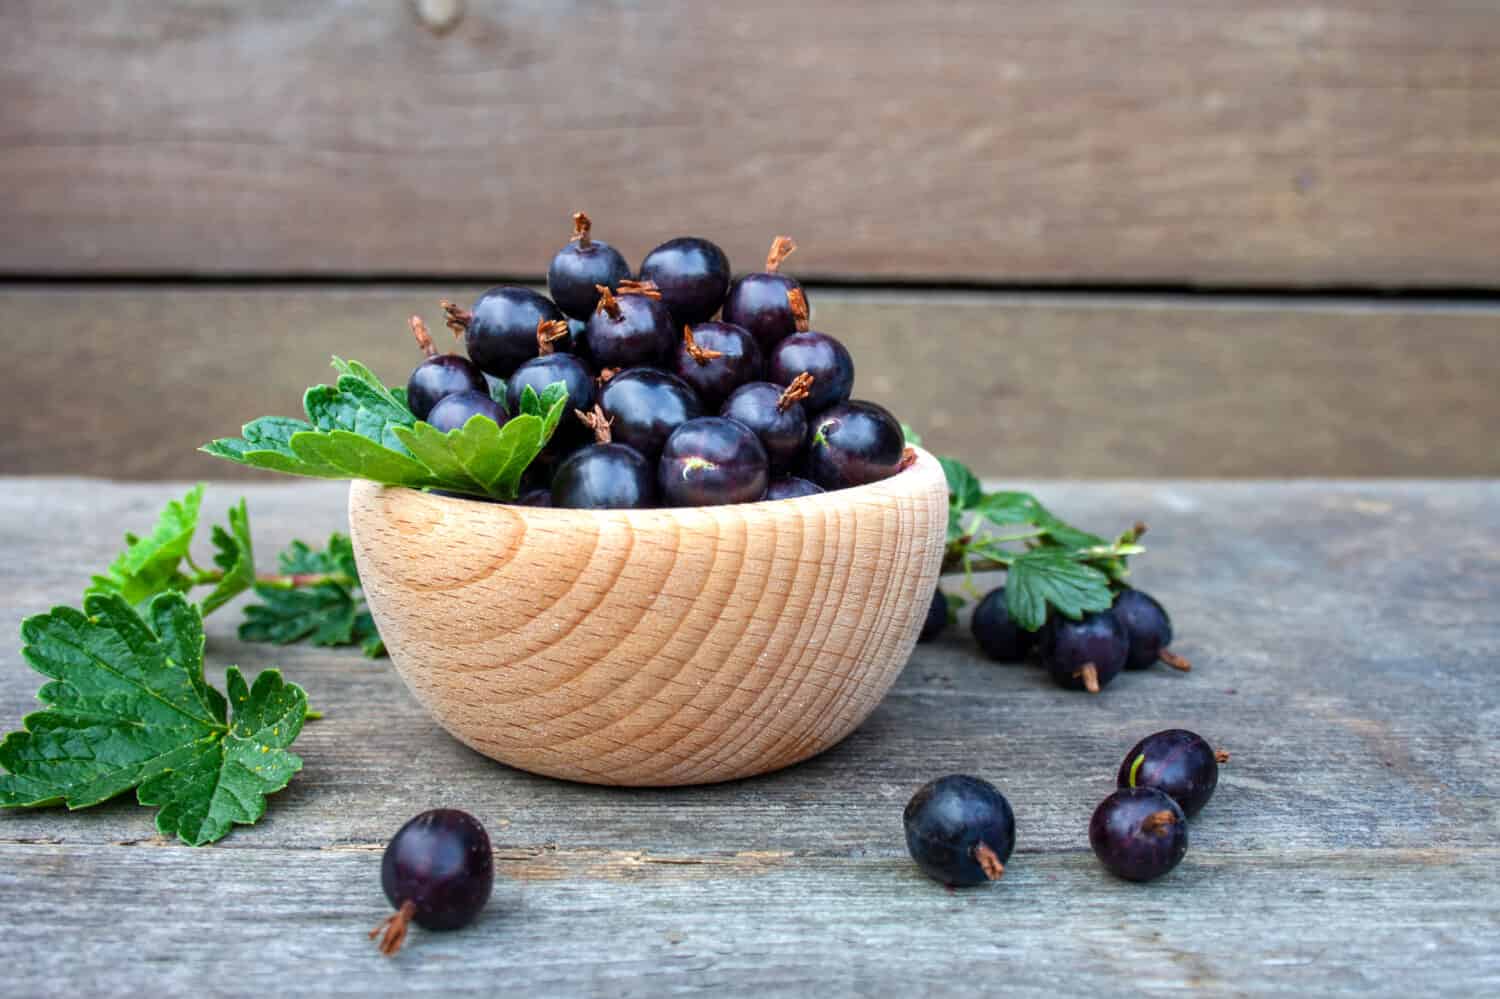  Jostaberry fruits in a wooden bowl